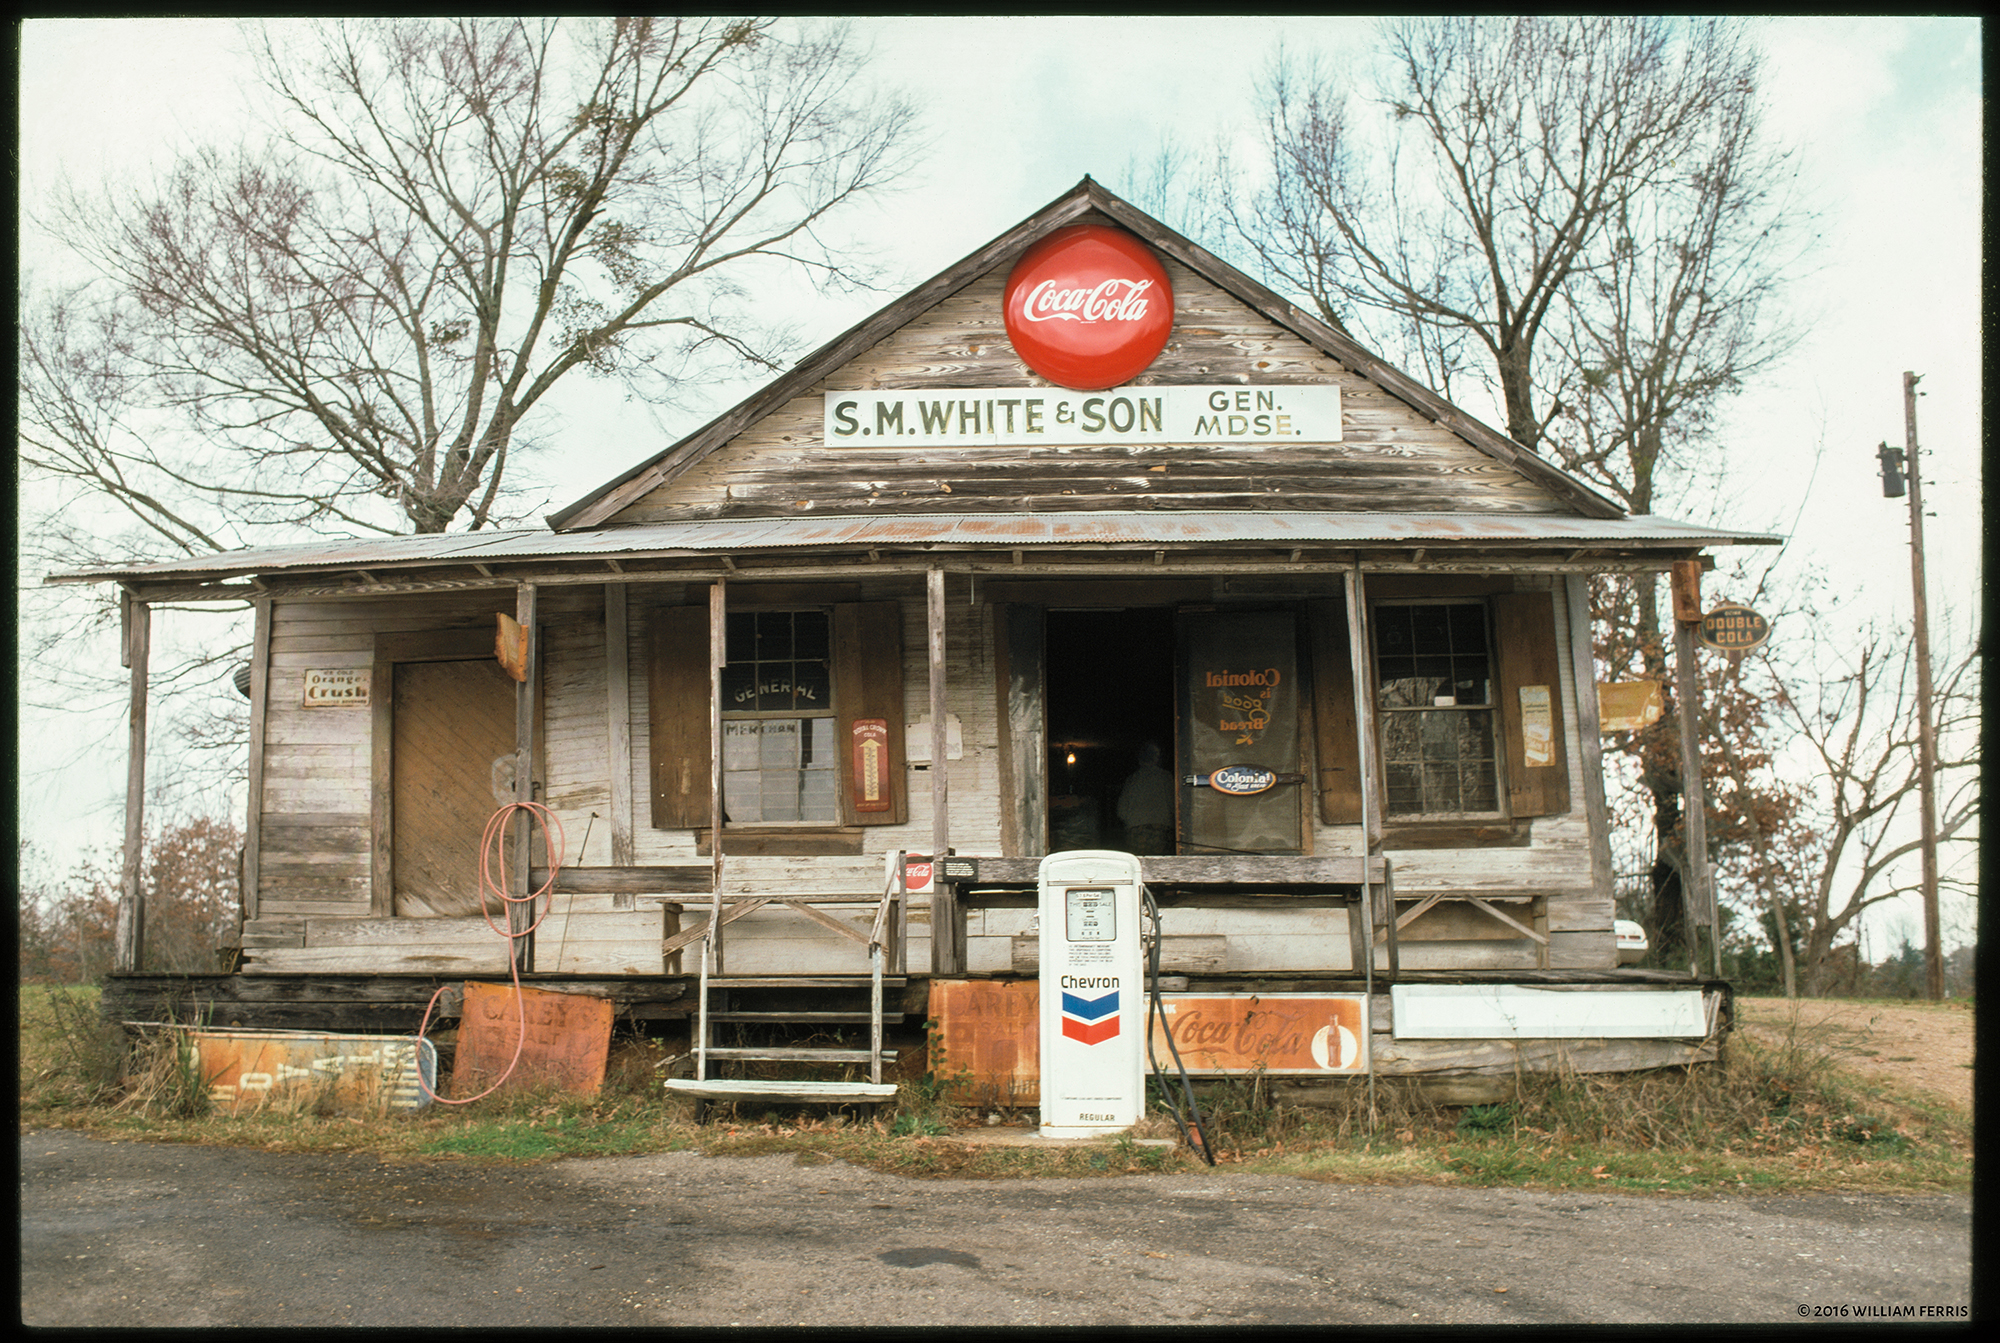 The exterior of a general store named S.M. White & Sons